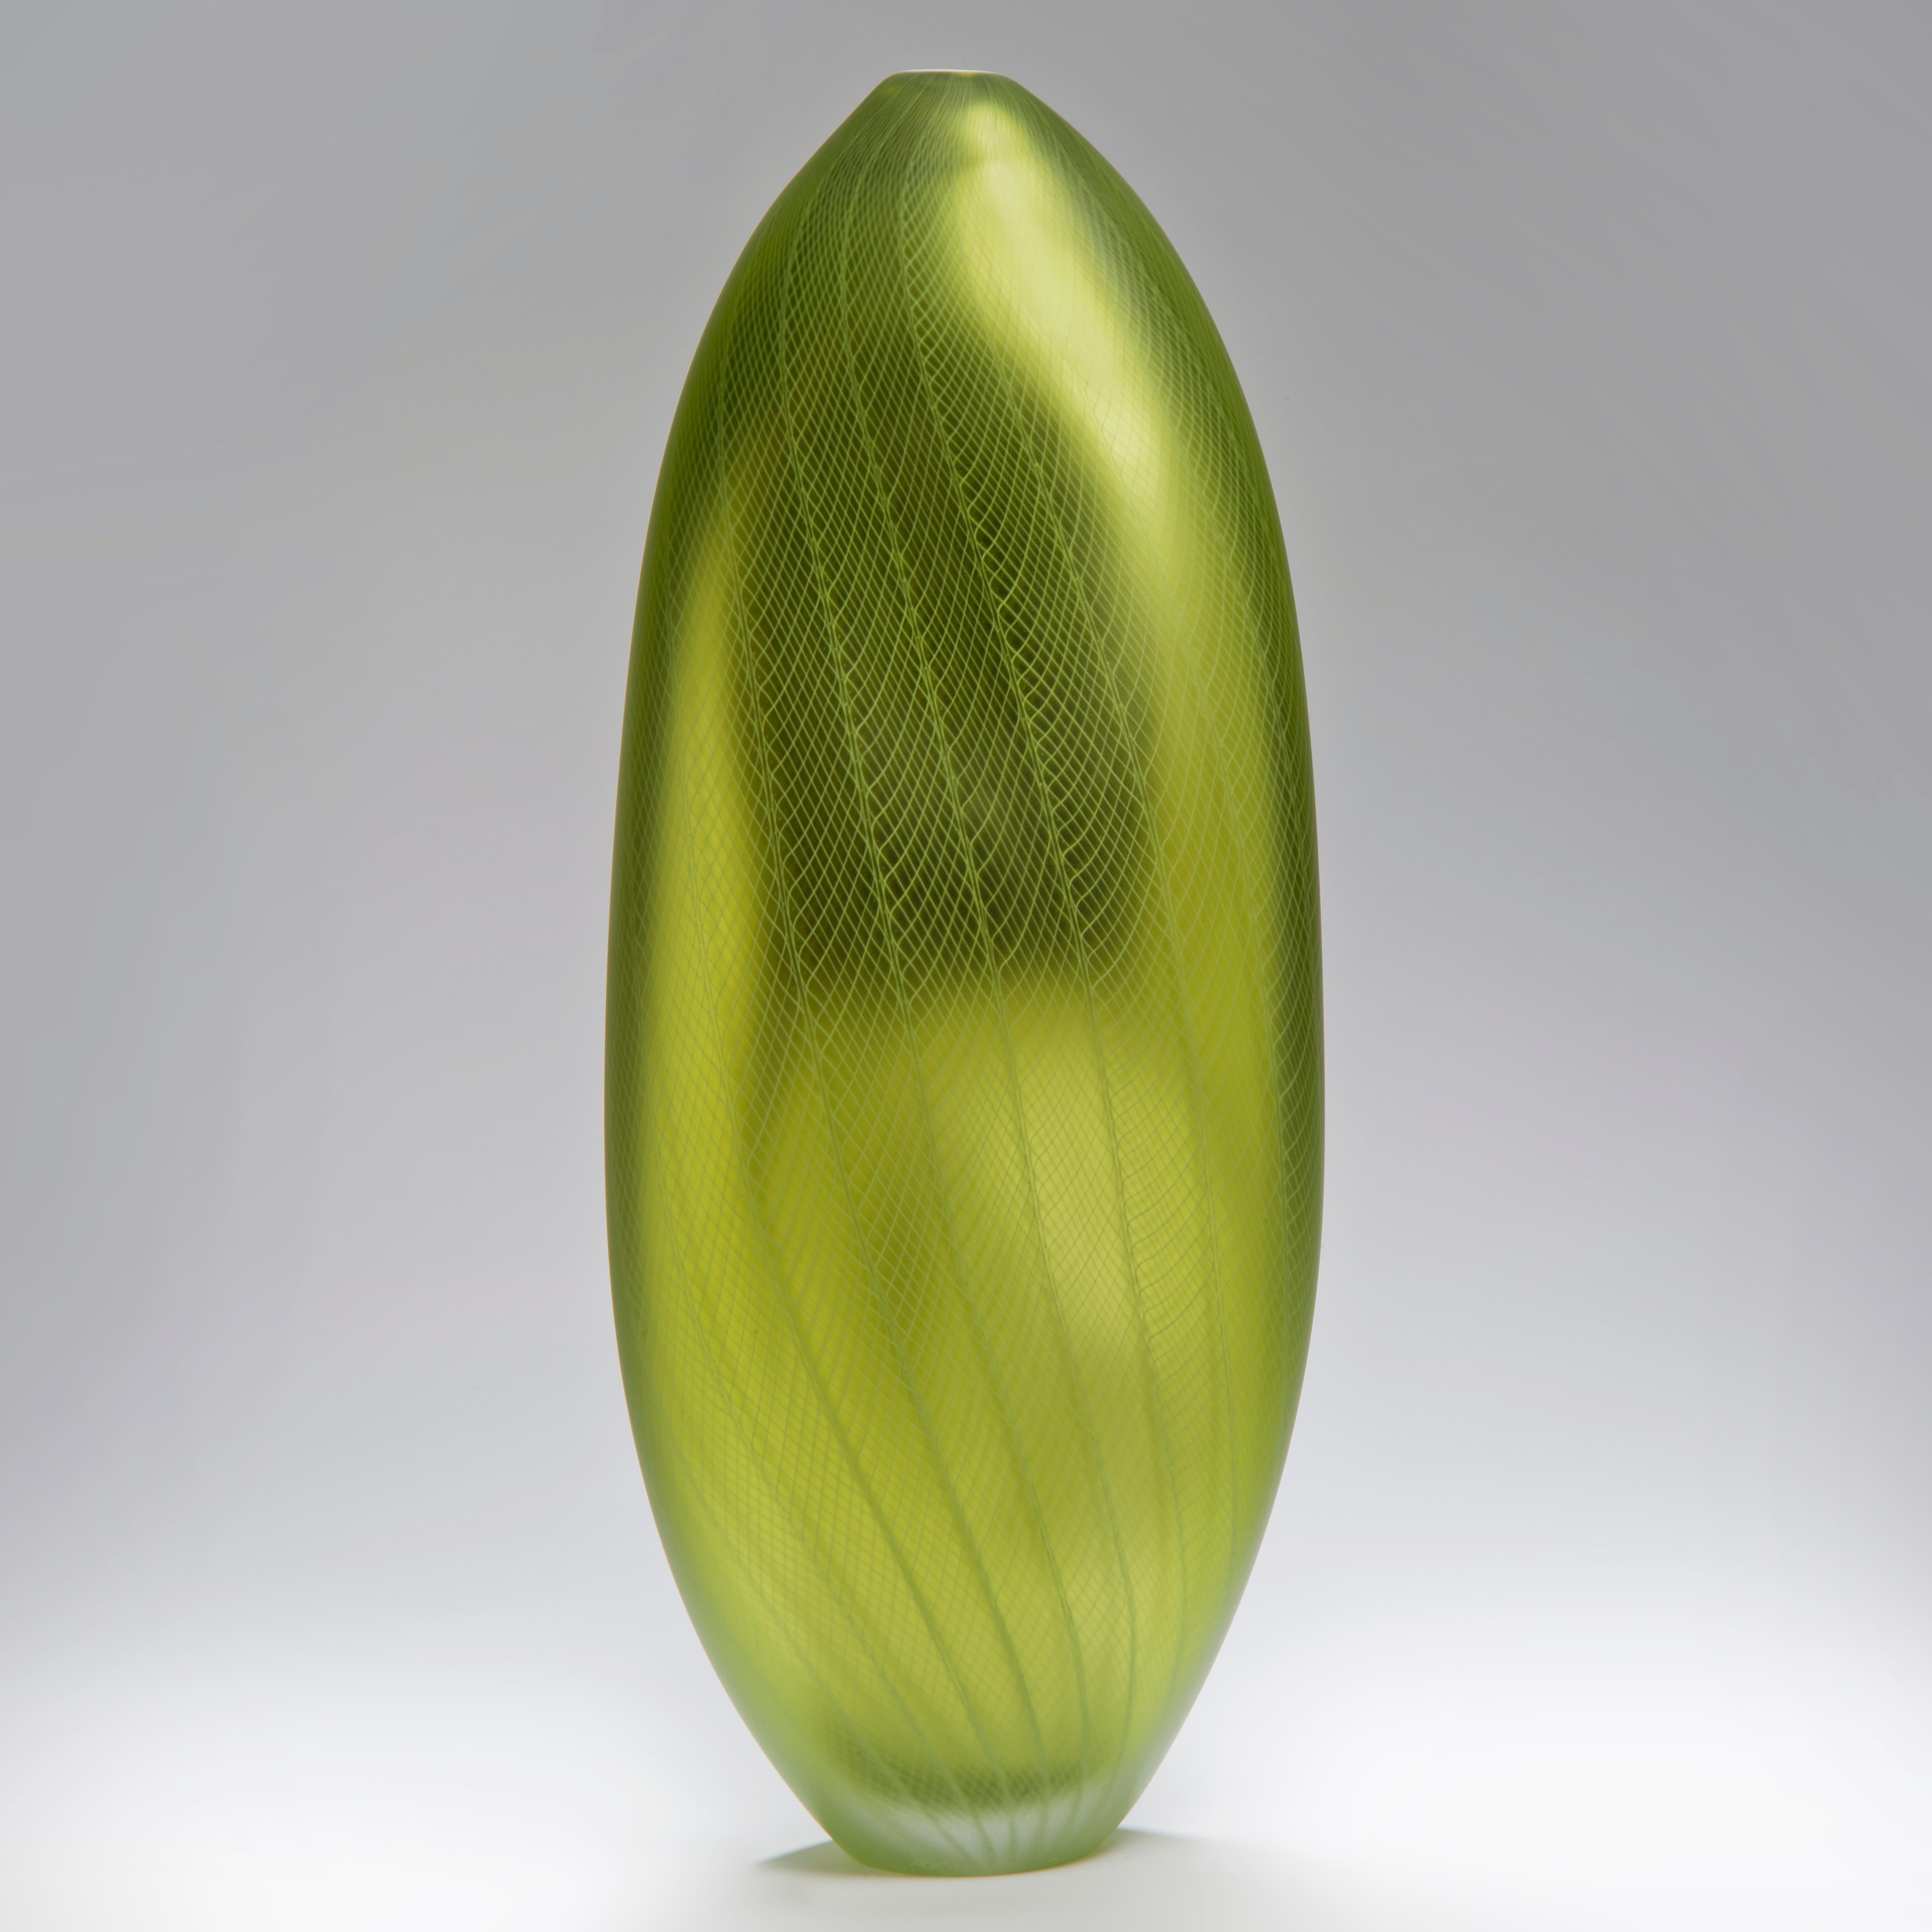 Stratiform Aerugo 1.0.001 is a unique hand-blown glass vessel with fine white filigree cane detail created by the British artist Liam Reeves. Hand blown in bright lime green glass, the interior has a mirrored finish, which results in a beautiful